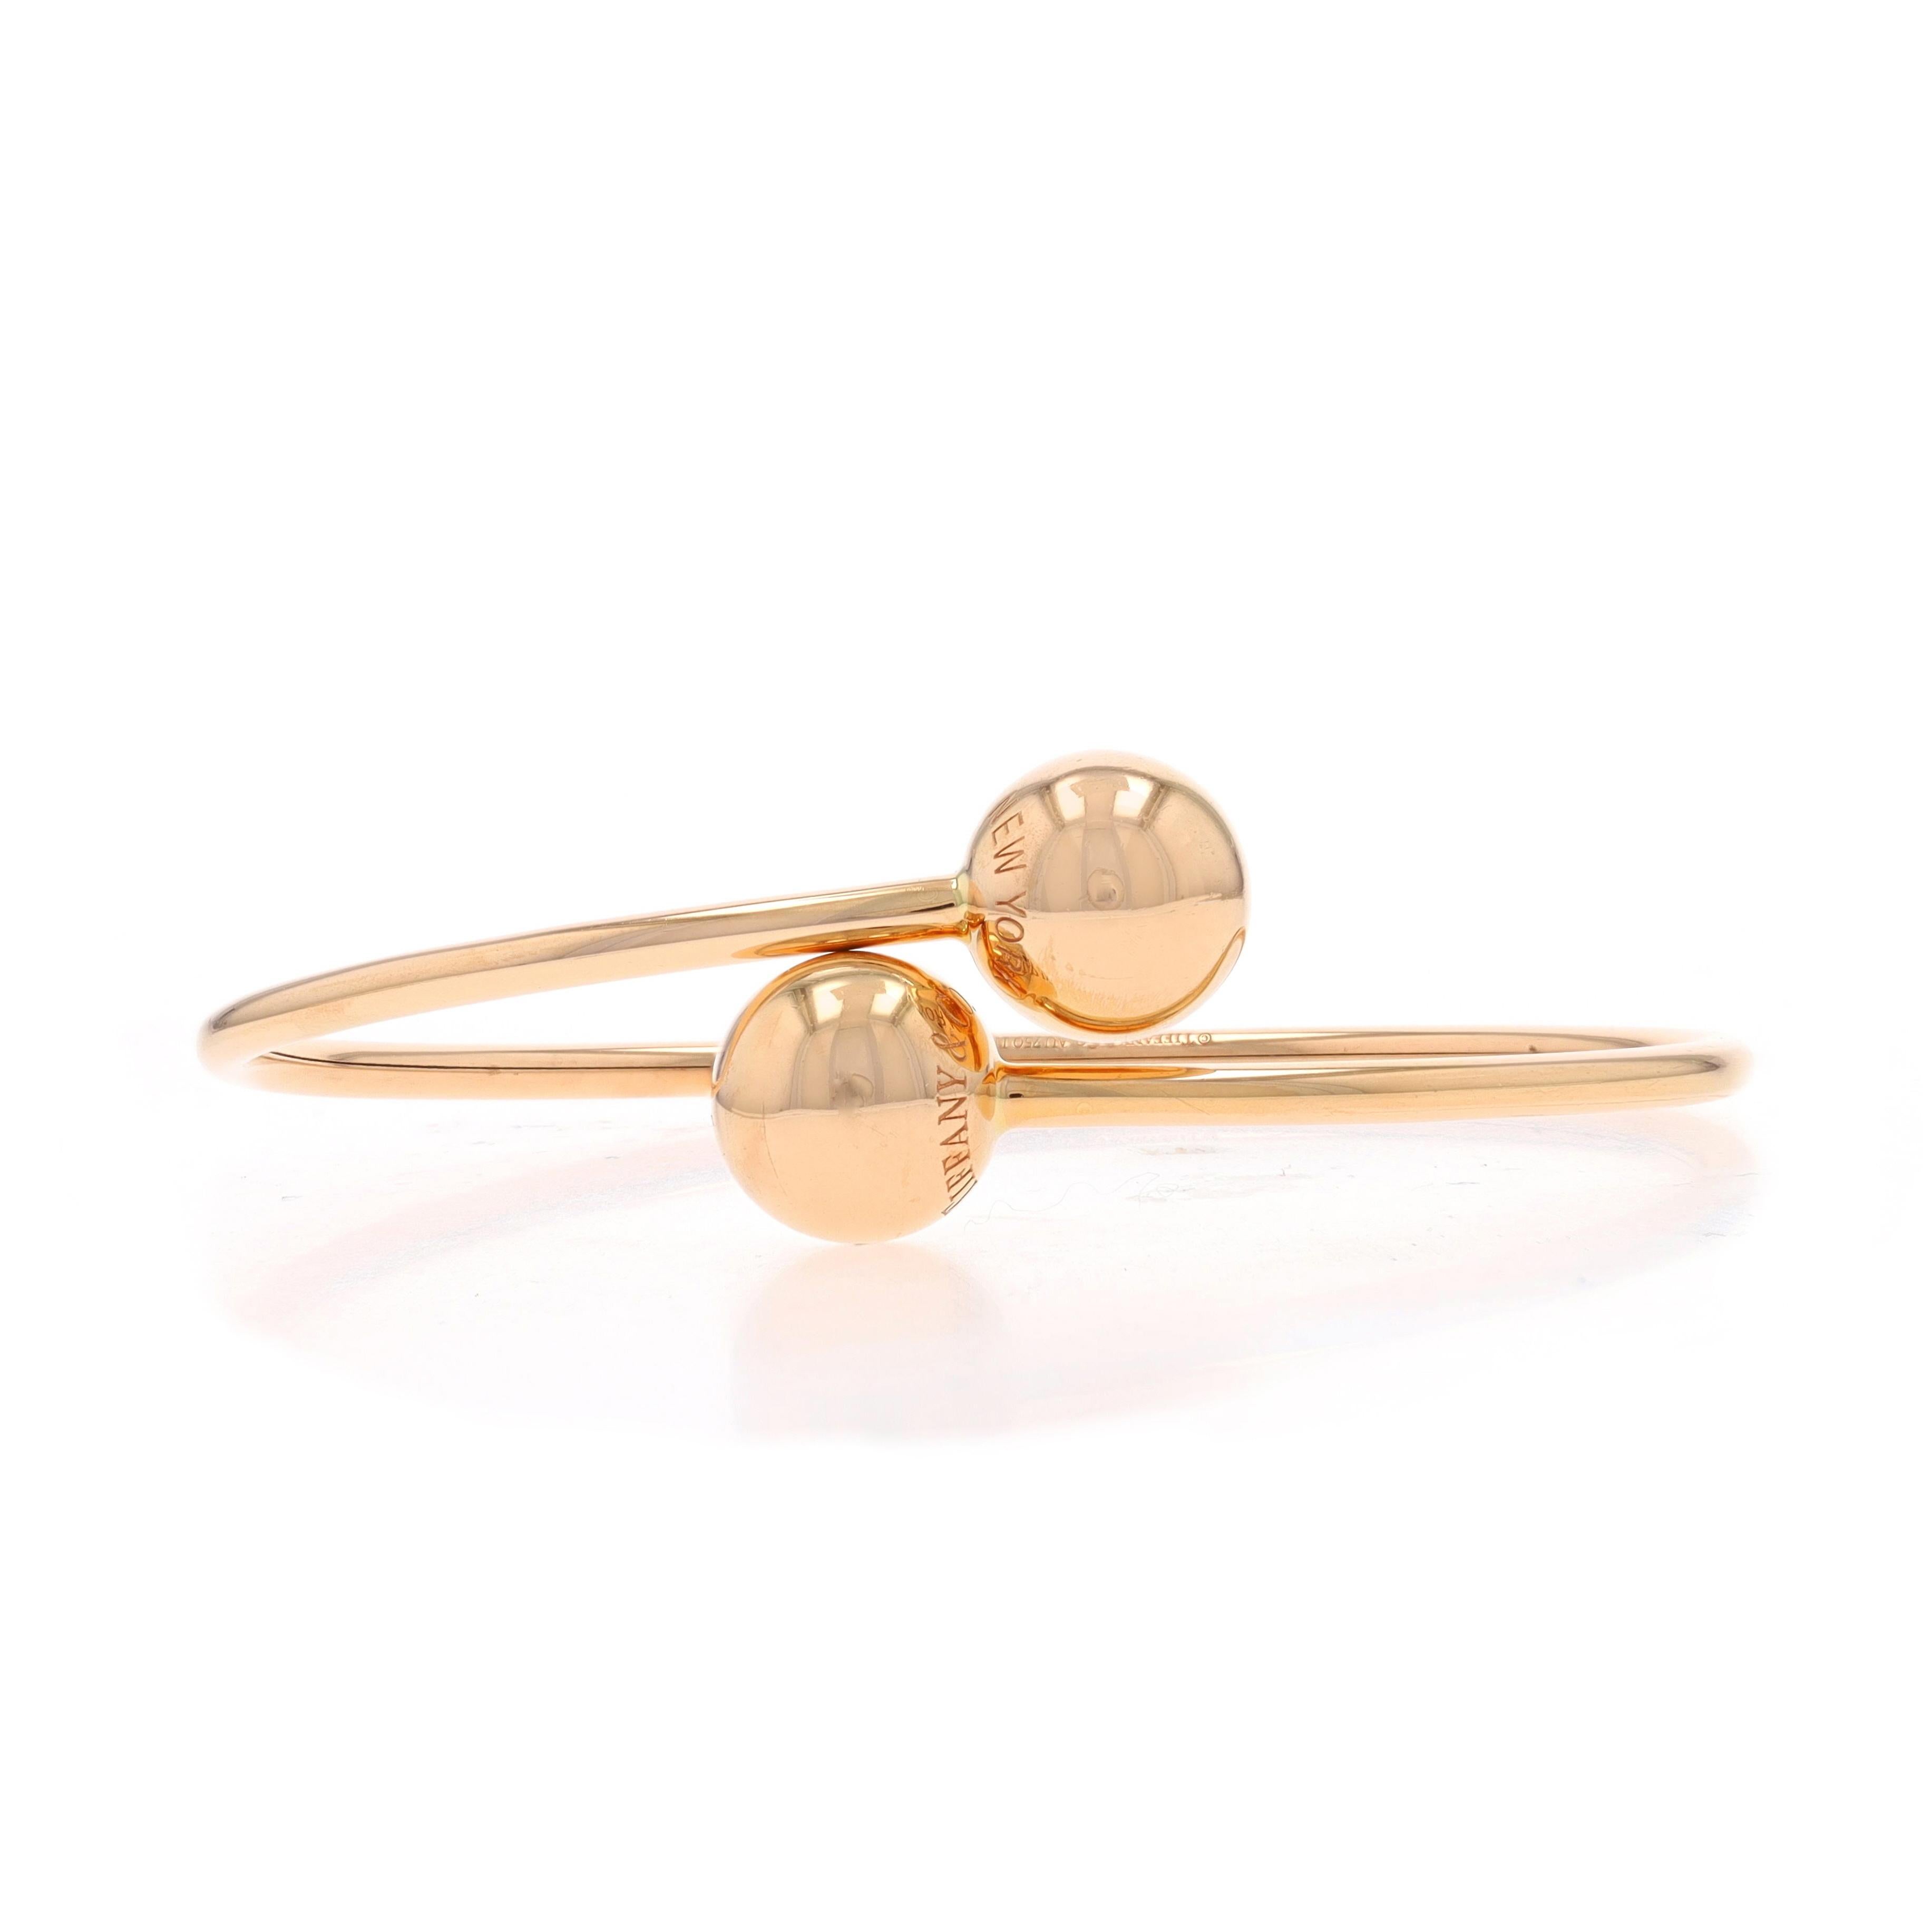 Brand: Tiffany & Co.
Collection: Hardwear
Design:  Bypass Ball Bangle

Metal Content: 18k Rose Gold

Style: Bypass Bangle
Fastening Type: N/A (slides over wrist)

Measurements

Inner Circumference: 6 1/4